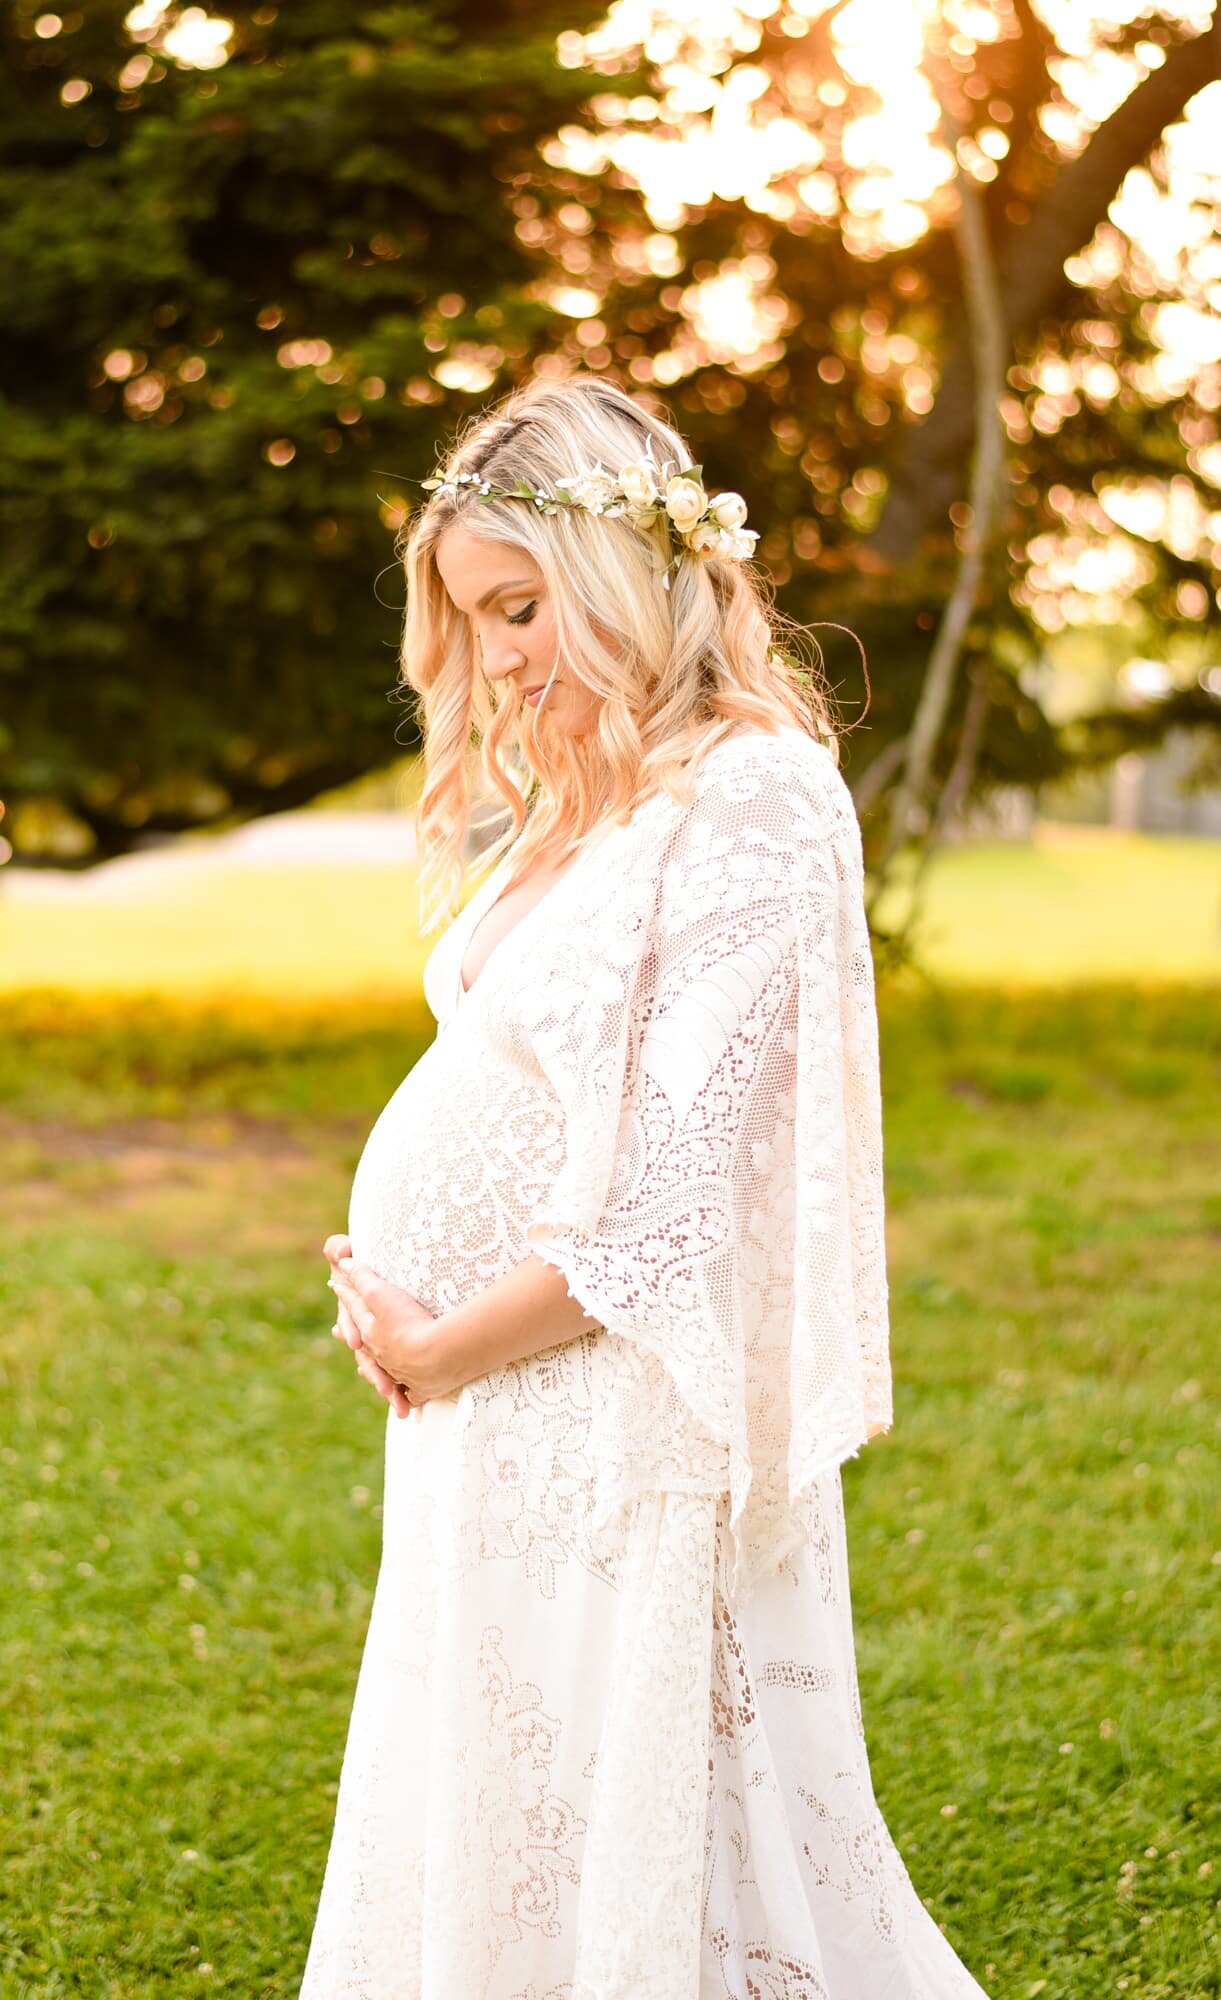 Maryland Maternity Photographer  3 Reasons Why Every Expecting Mother  Needs Maternity Photos — Little Snaps Photography